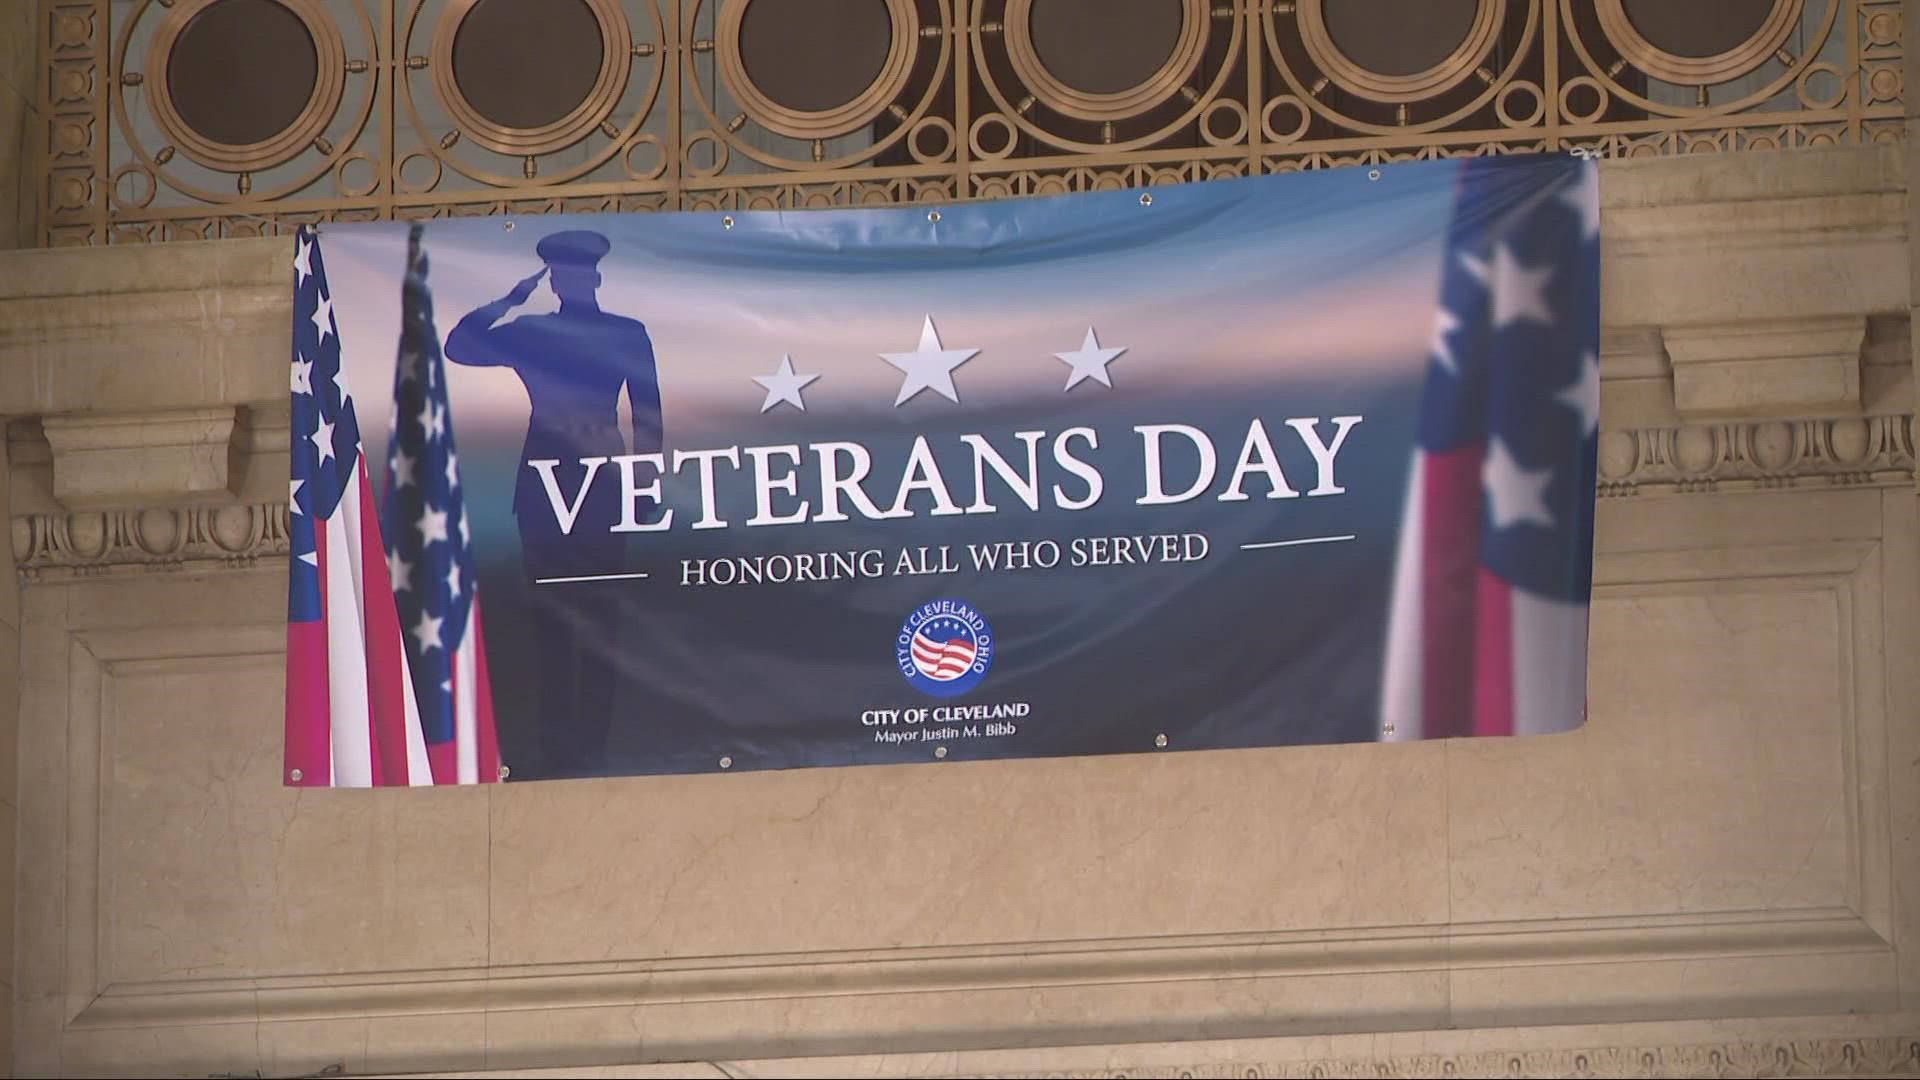 Today's Veterans Day events included remarks from Mayor Justin M. Bibb and other local officials.